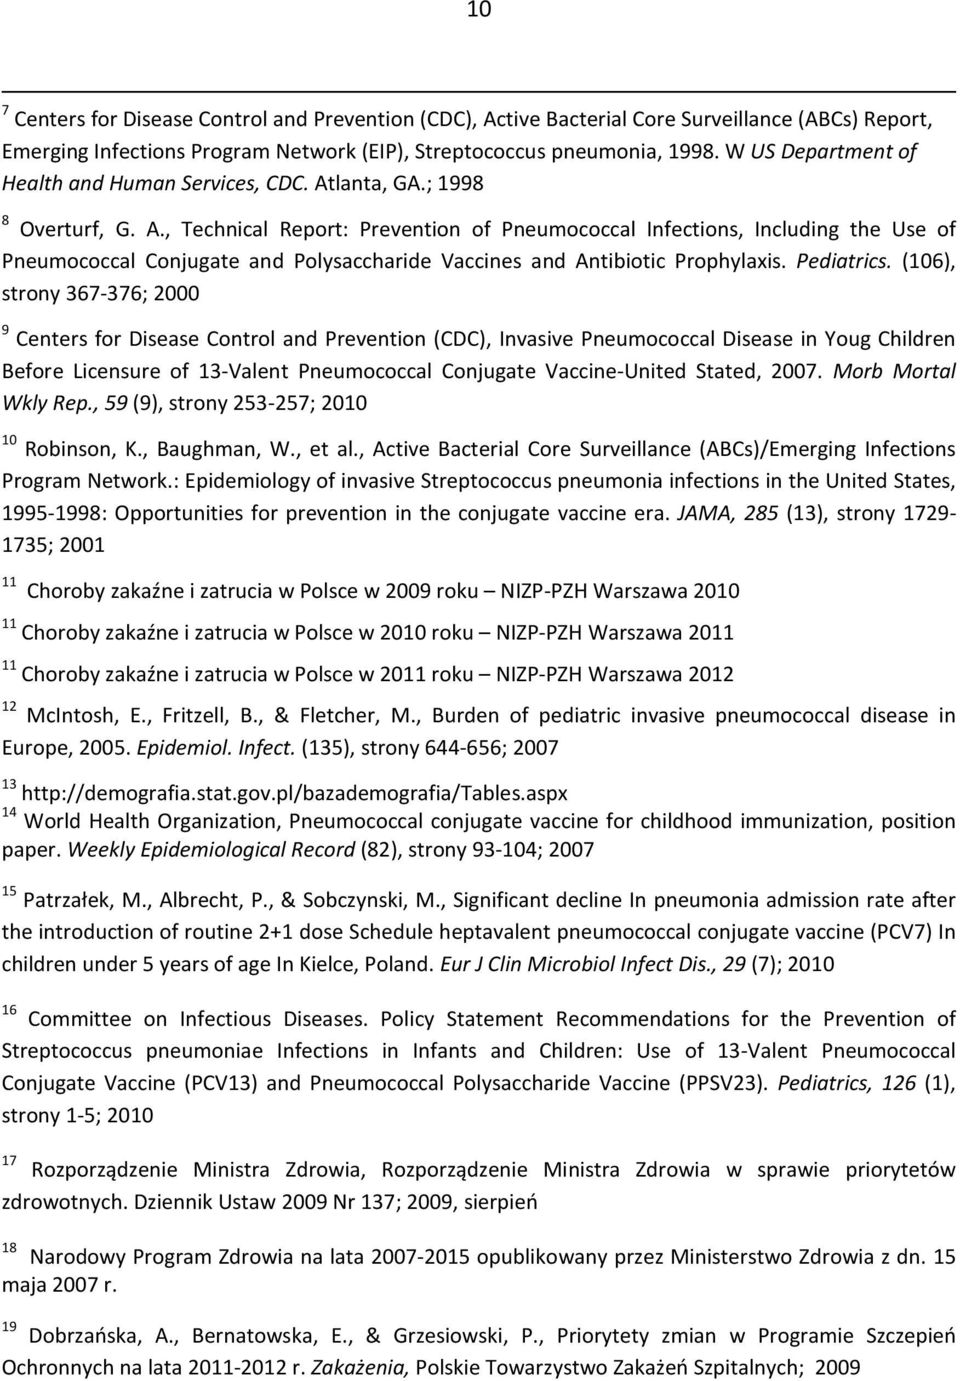 lanta, GA.; 1998 8 Overturf, G. A., Technical Report: Prevention of Pneumococcal Infections, Including the Use of Pneumococcal Conjugate and Polysaccharide Vaccines and Antibiotic Prophylaxis.